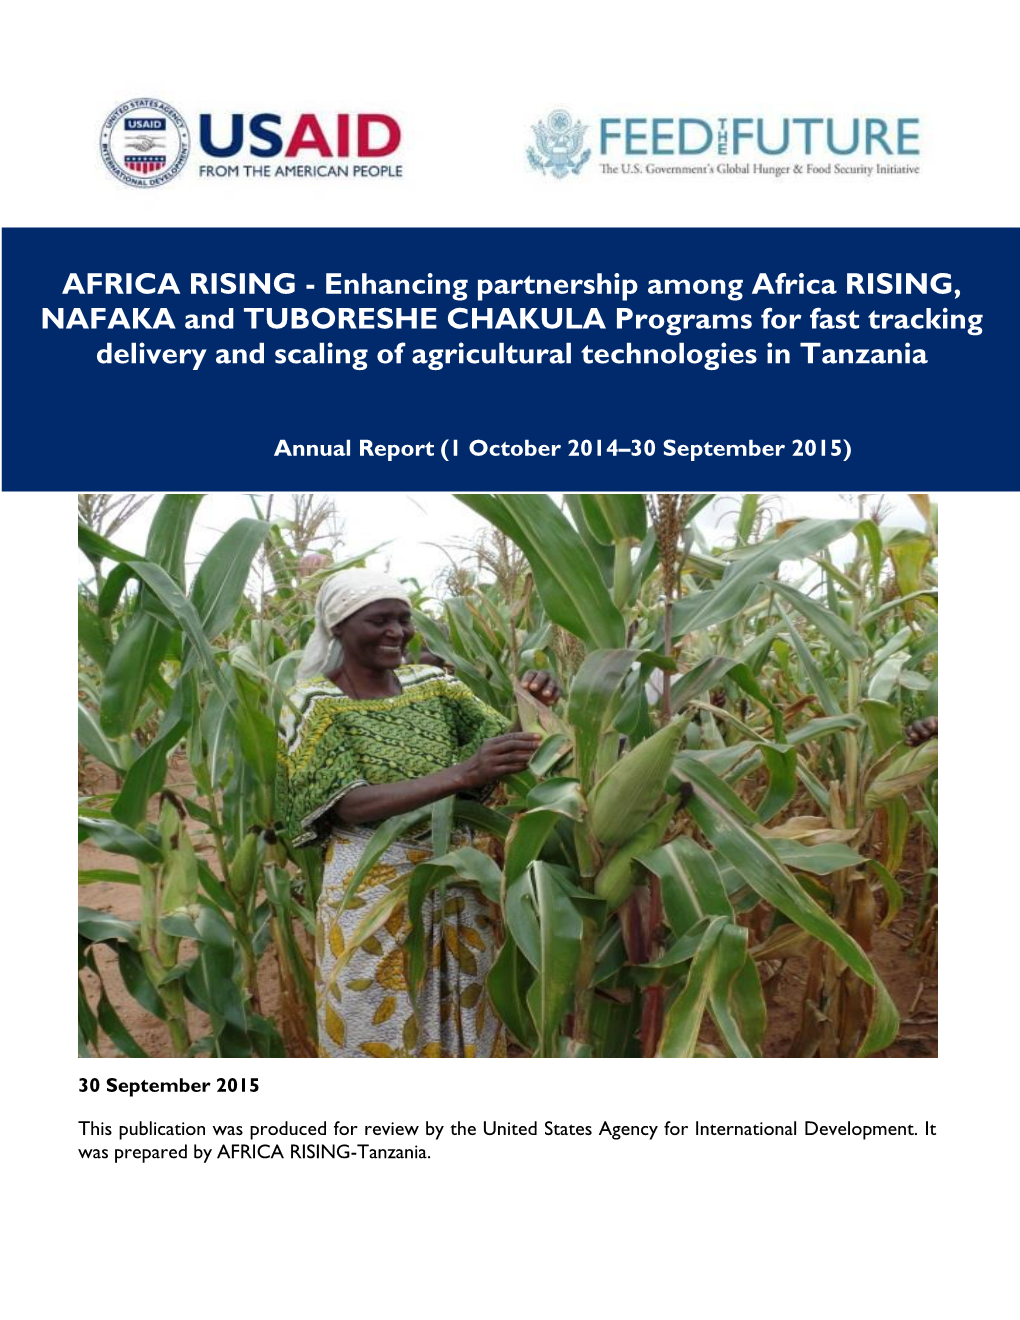 Enhancing Partnership Among Africa RISING, NAFAKA and TUBORESHE CHAKULA Programs for Fast Tracking Delivery and Scaling of Agricultural Technologies in Tanzania